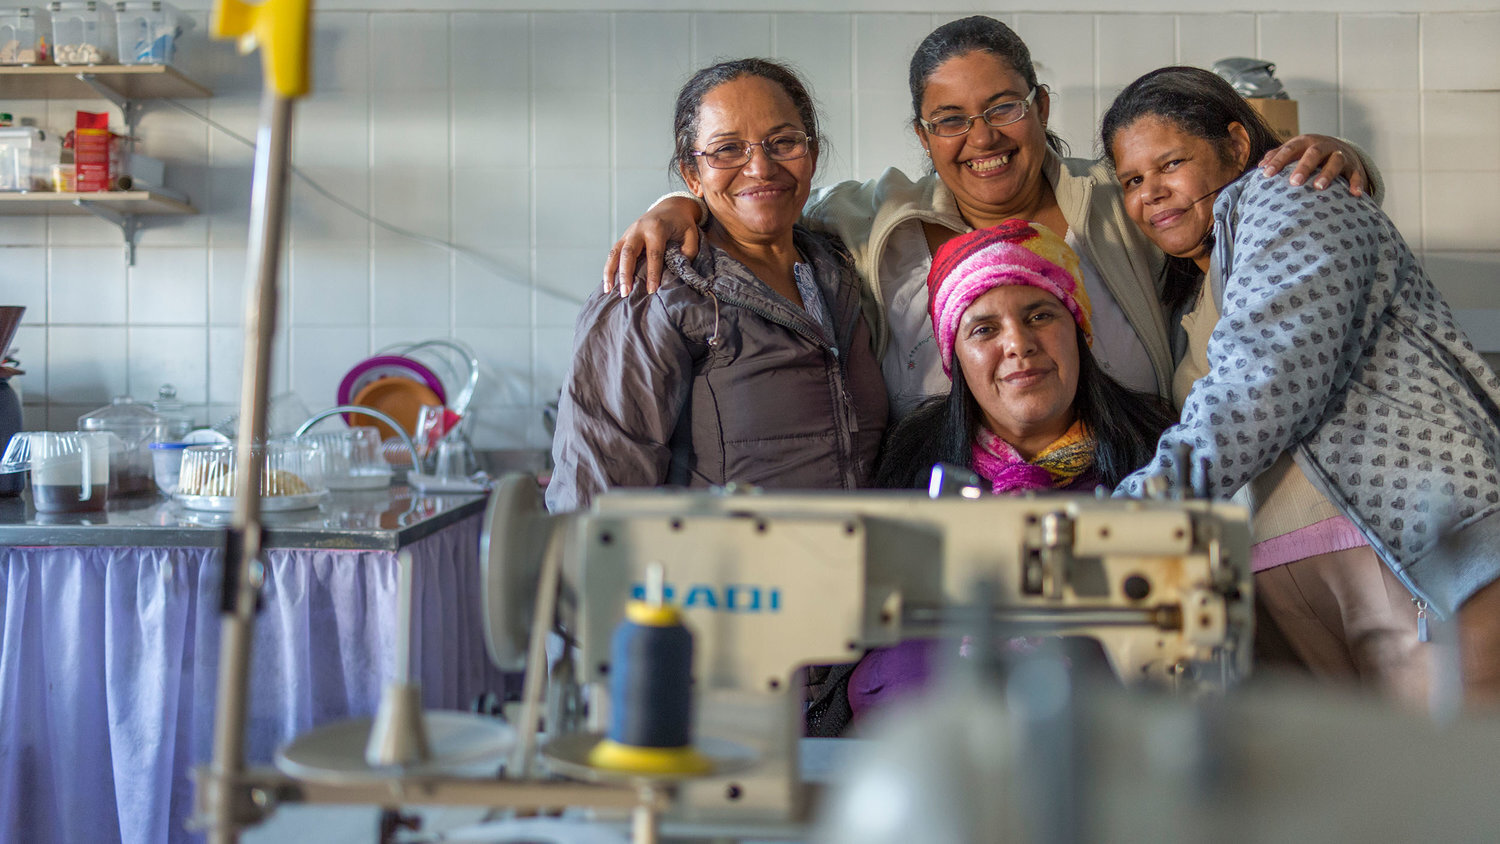 NESsT’s portfolio company, Retalhar, trains and contracts women from low-income communities to produce the upcycled corporate gifts and blankets, increasing their household income and livelihoods.